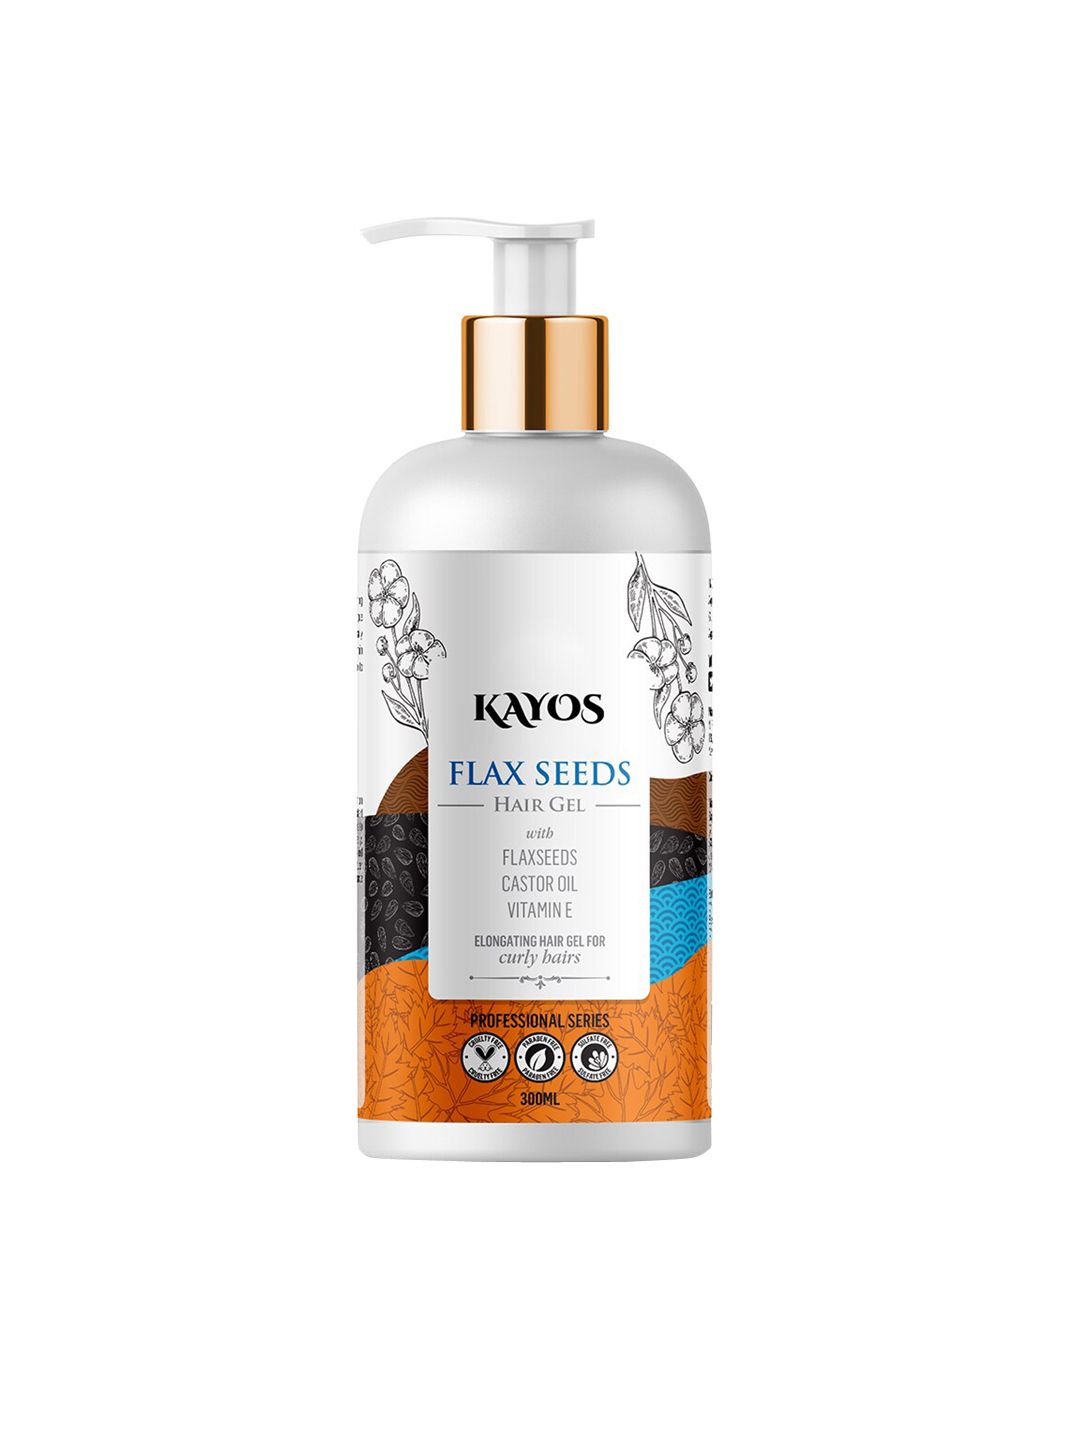 KAYOS Flaxseed Hair Gel For Curly Hair - 300 ml Price in India